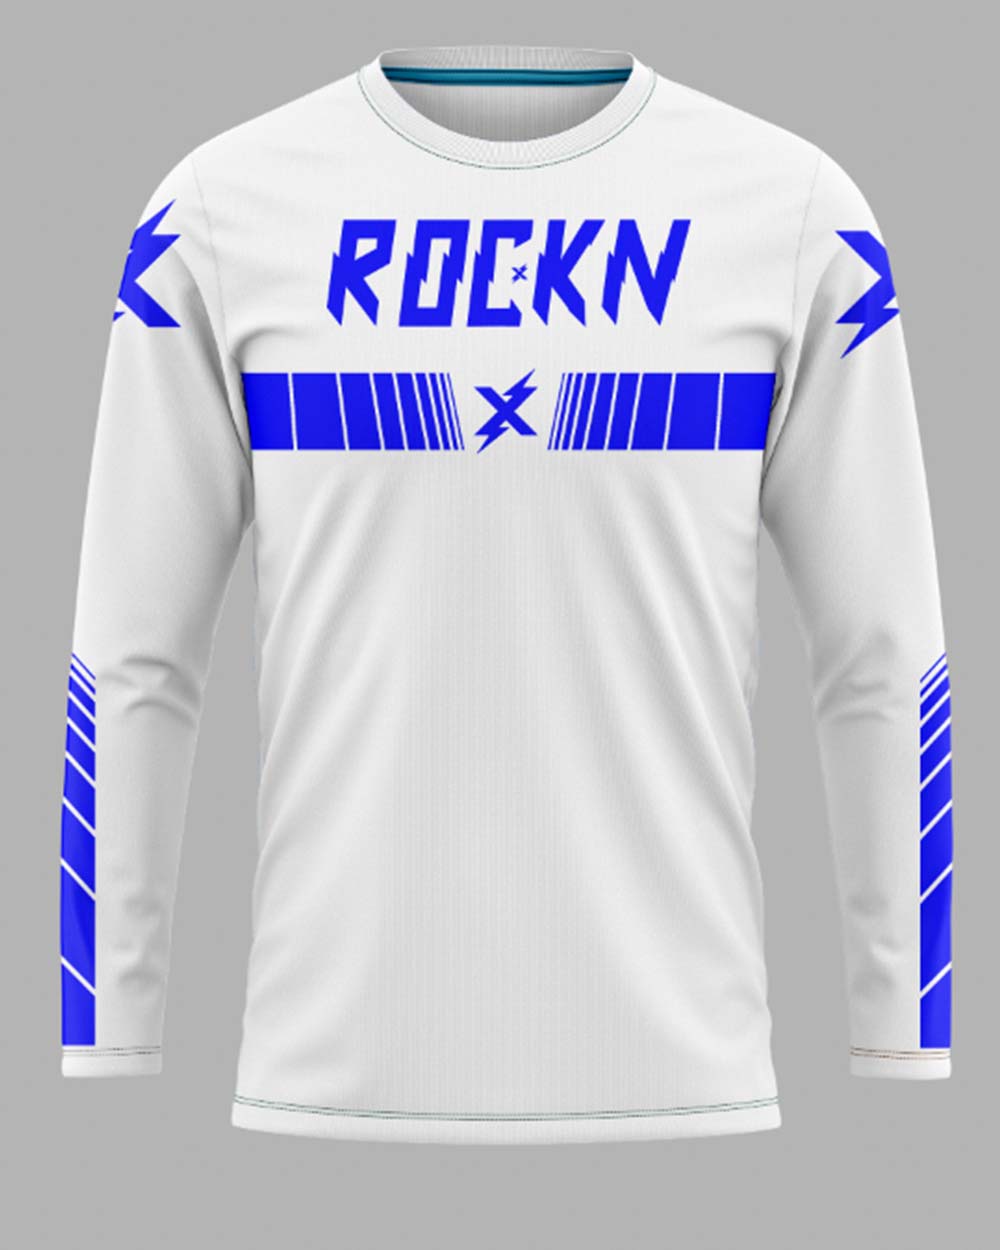 Jersey Speed Lines White/Blue - FREE Custom Sublimation